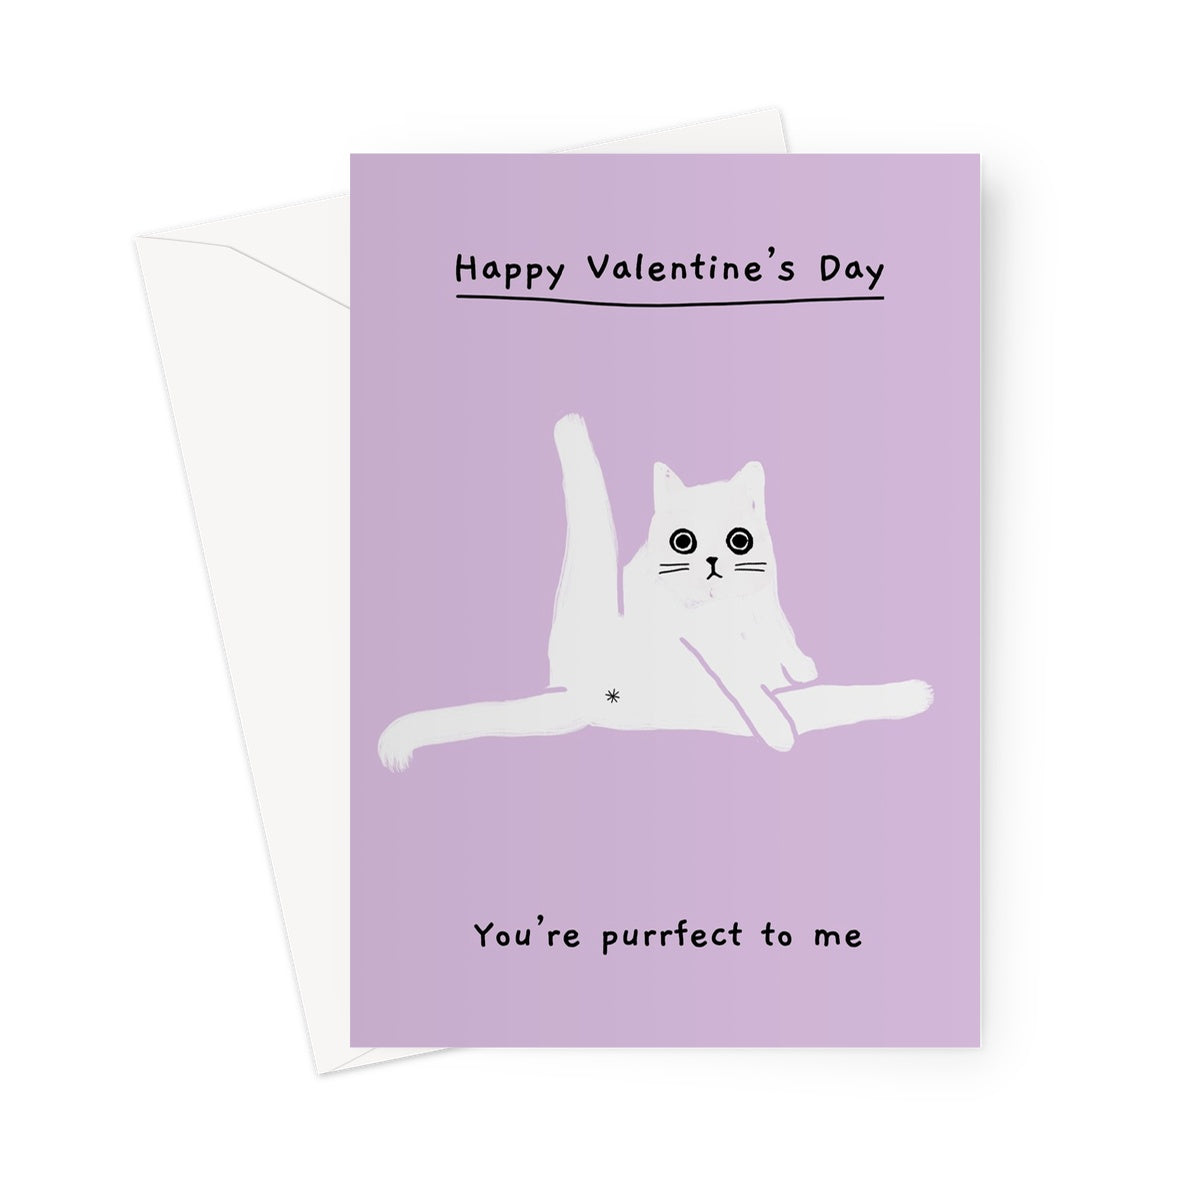 You're Purrfect To Me - Valentine's Day Card